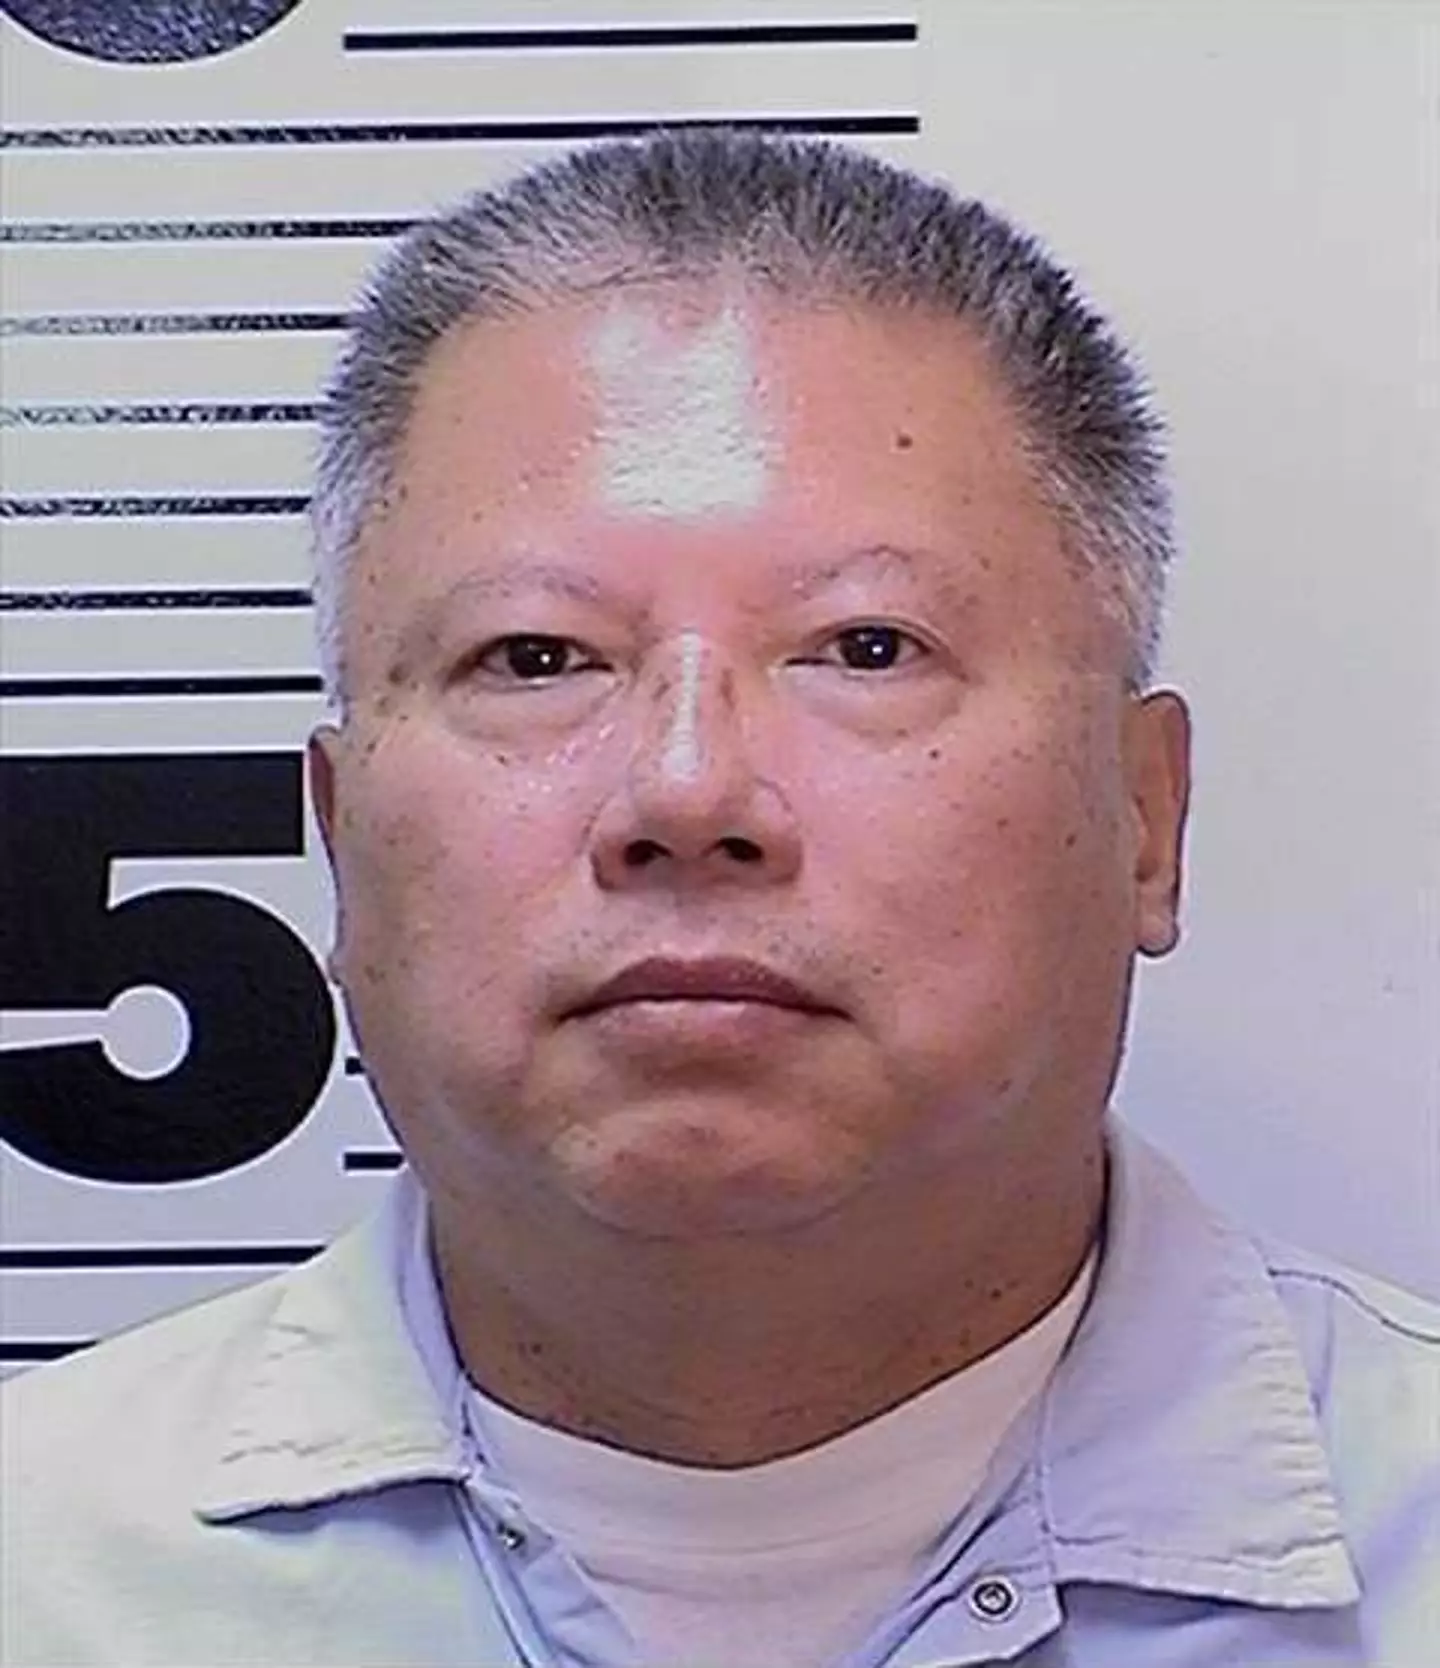 Charles Ng was part of the sick plot to abduct, rape and kill victims (California Department of Corrections and Rehabilitation)